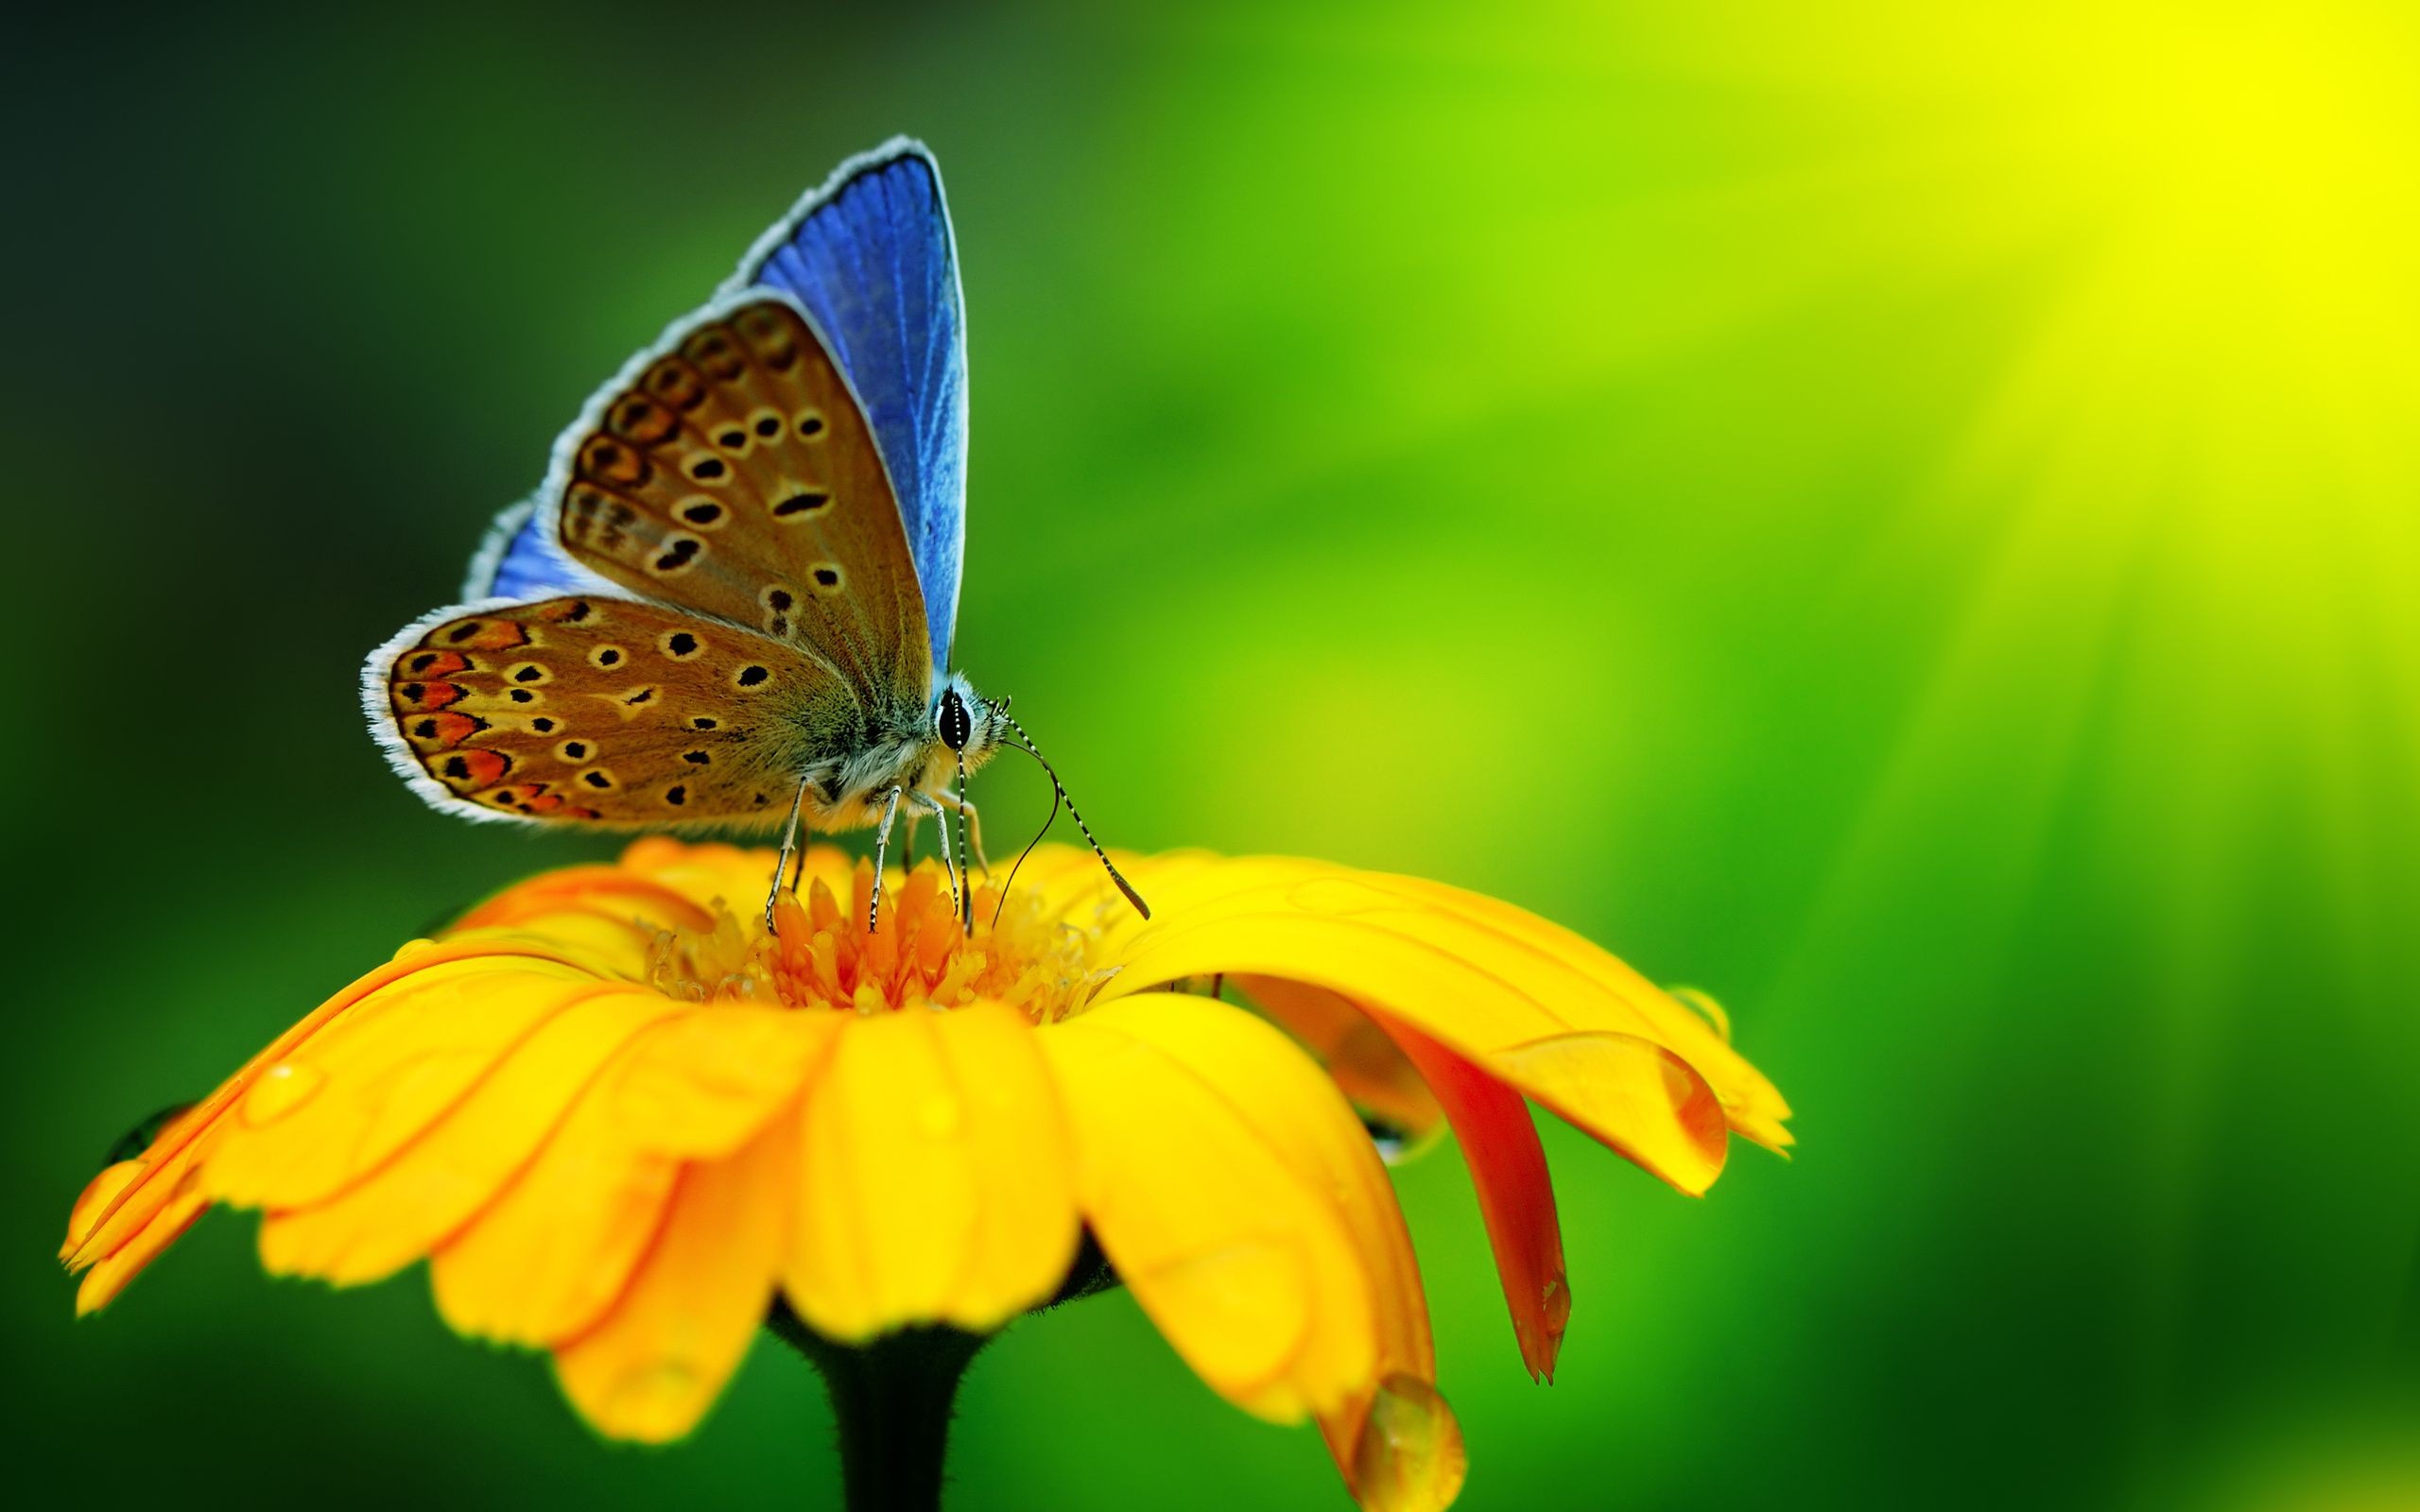 General 2560x1600 butterfly insect animals vibrant plants flowers yellow flowers macro closeup